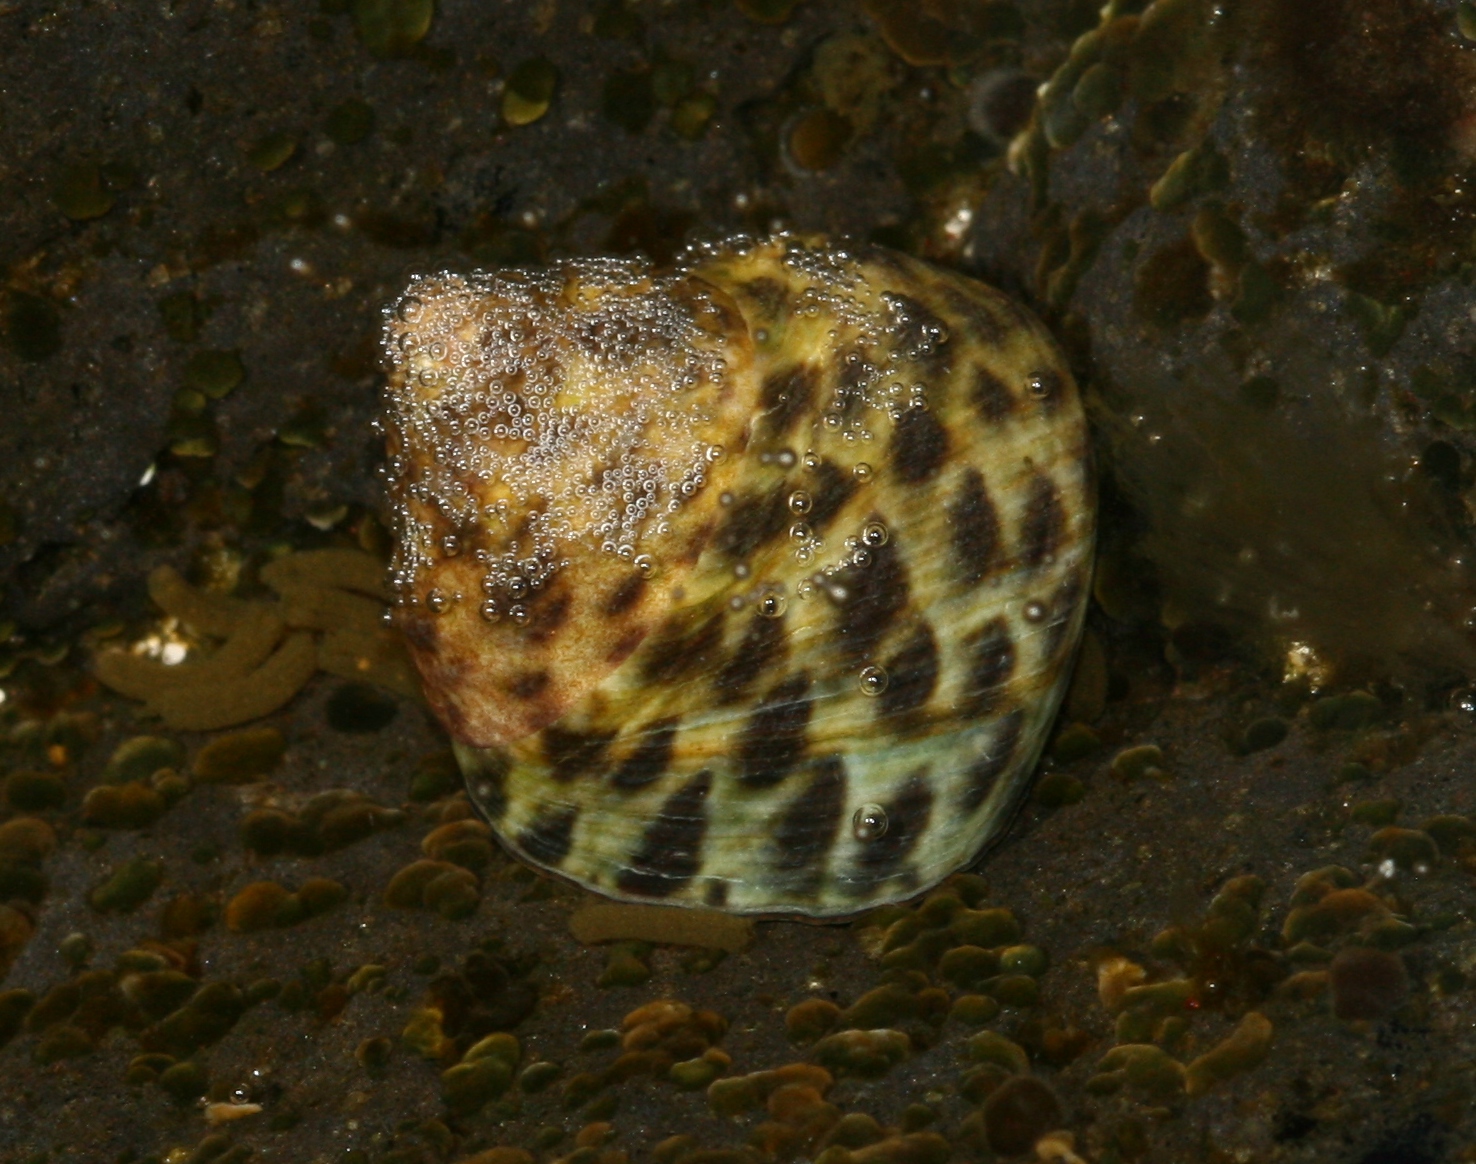 a clam is shown on a bed of rocks